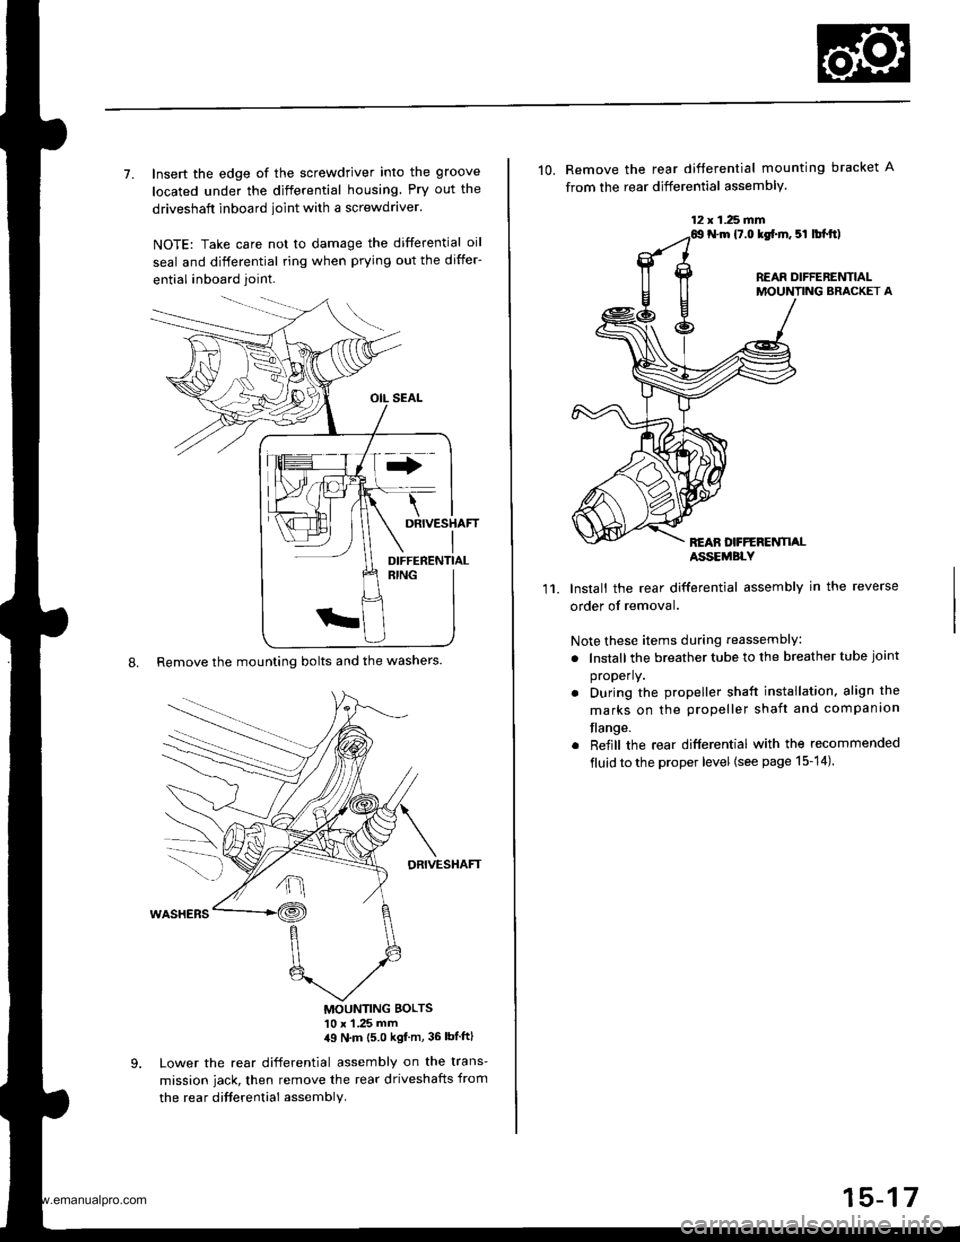 HONDA CR-V 2000 RD1-RD3 / 1.G Workshop Manual 
7. Insert the edge of the screwdriver into the groove
located under the differential housing Pry out the
driveshaft inboard ioint with a screwdraver.
NOTE: Take care not to damage the differential oi